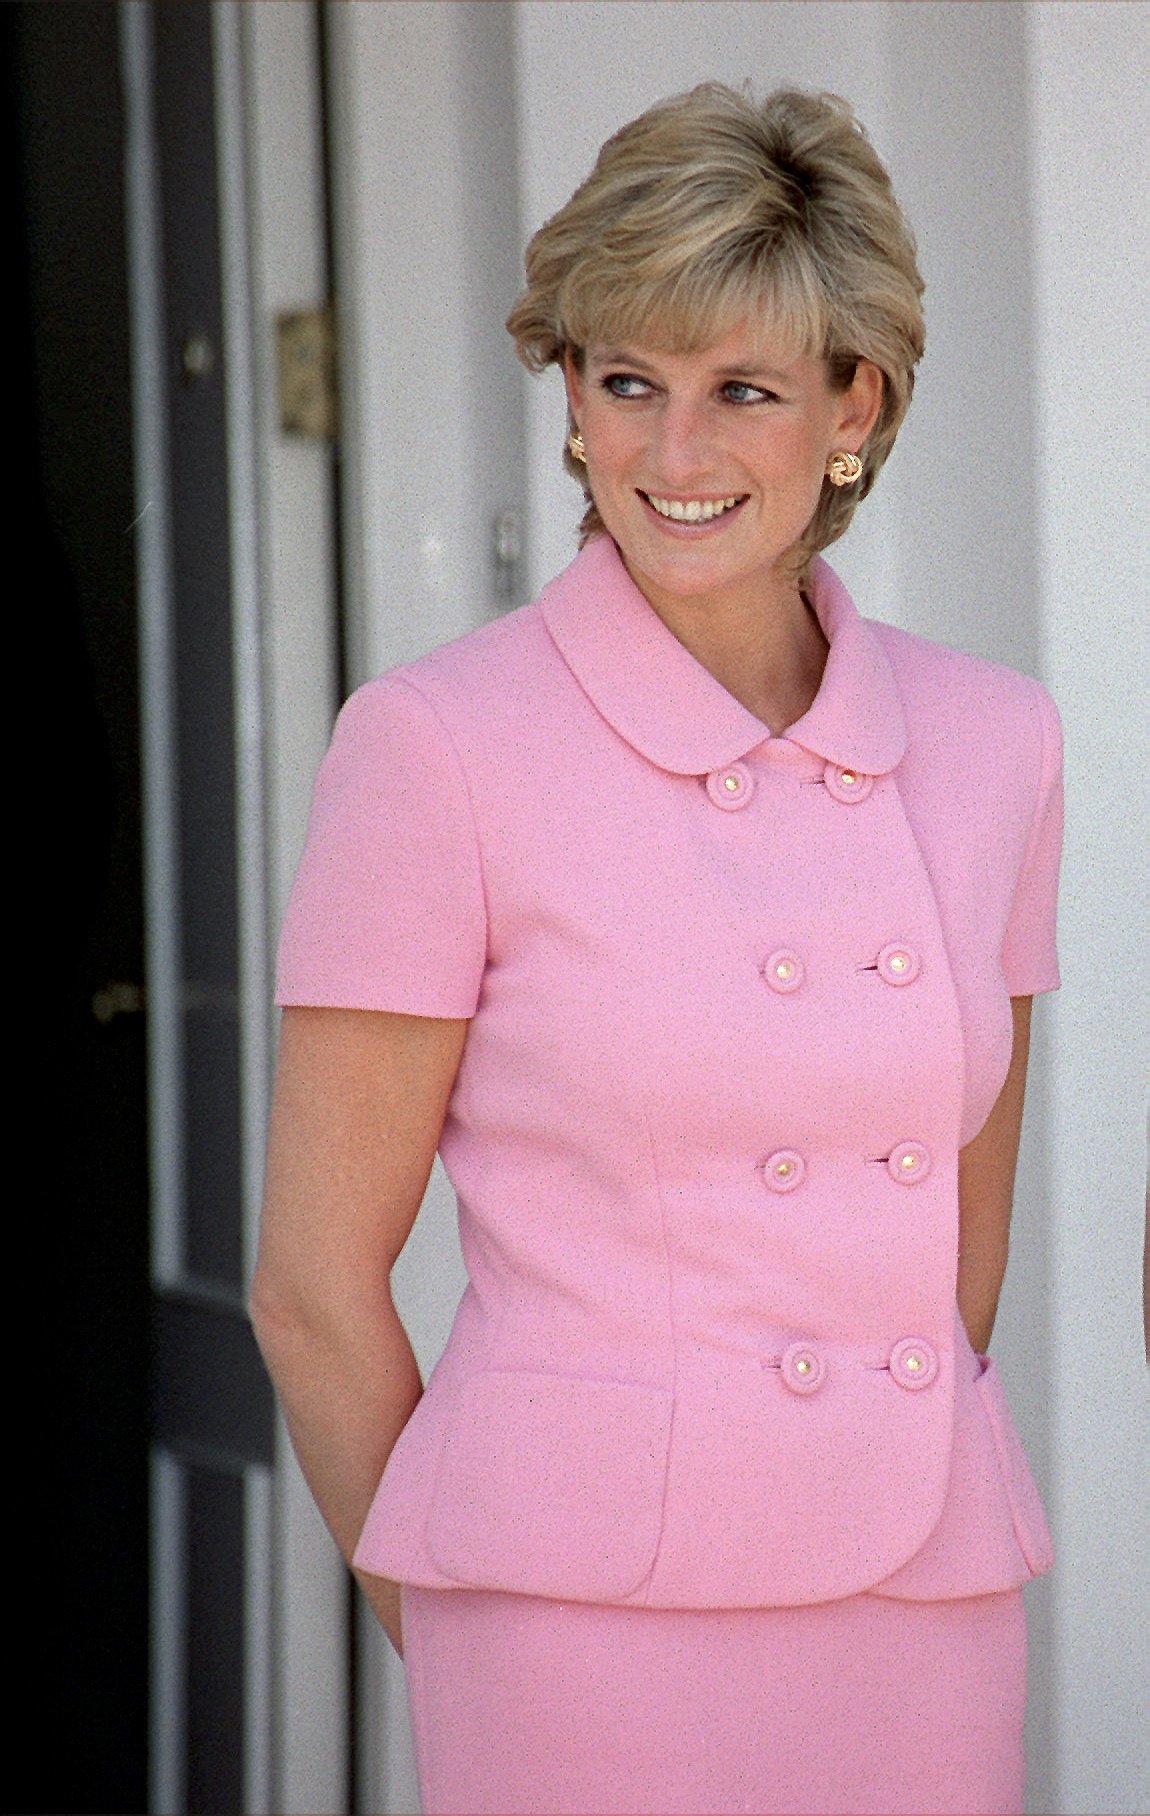 Princess Diana in Argentina on November 24, 1995. | Source: Tim Graham Photo Library/Getty Images